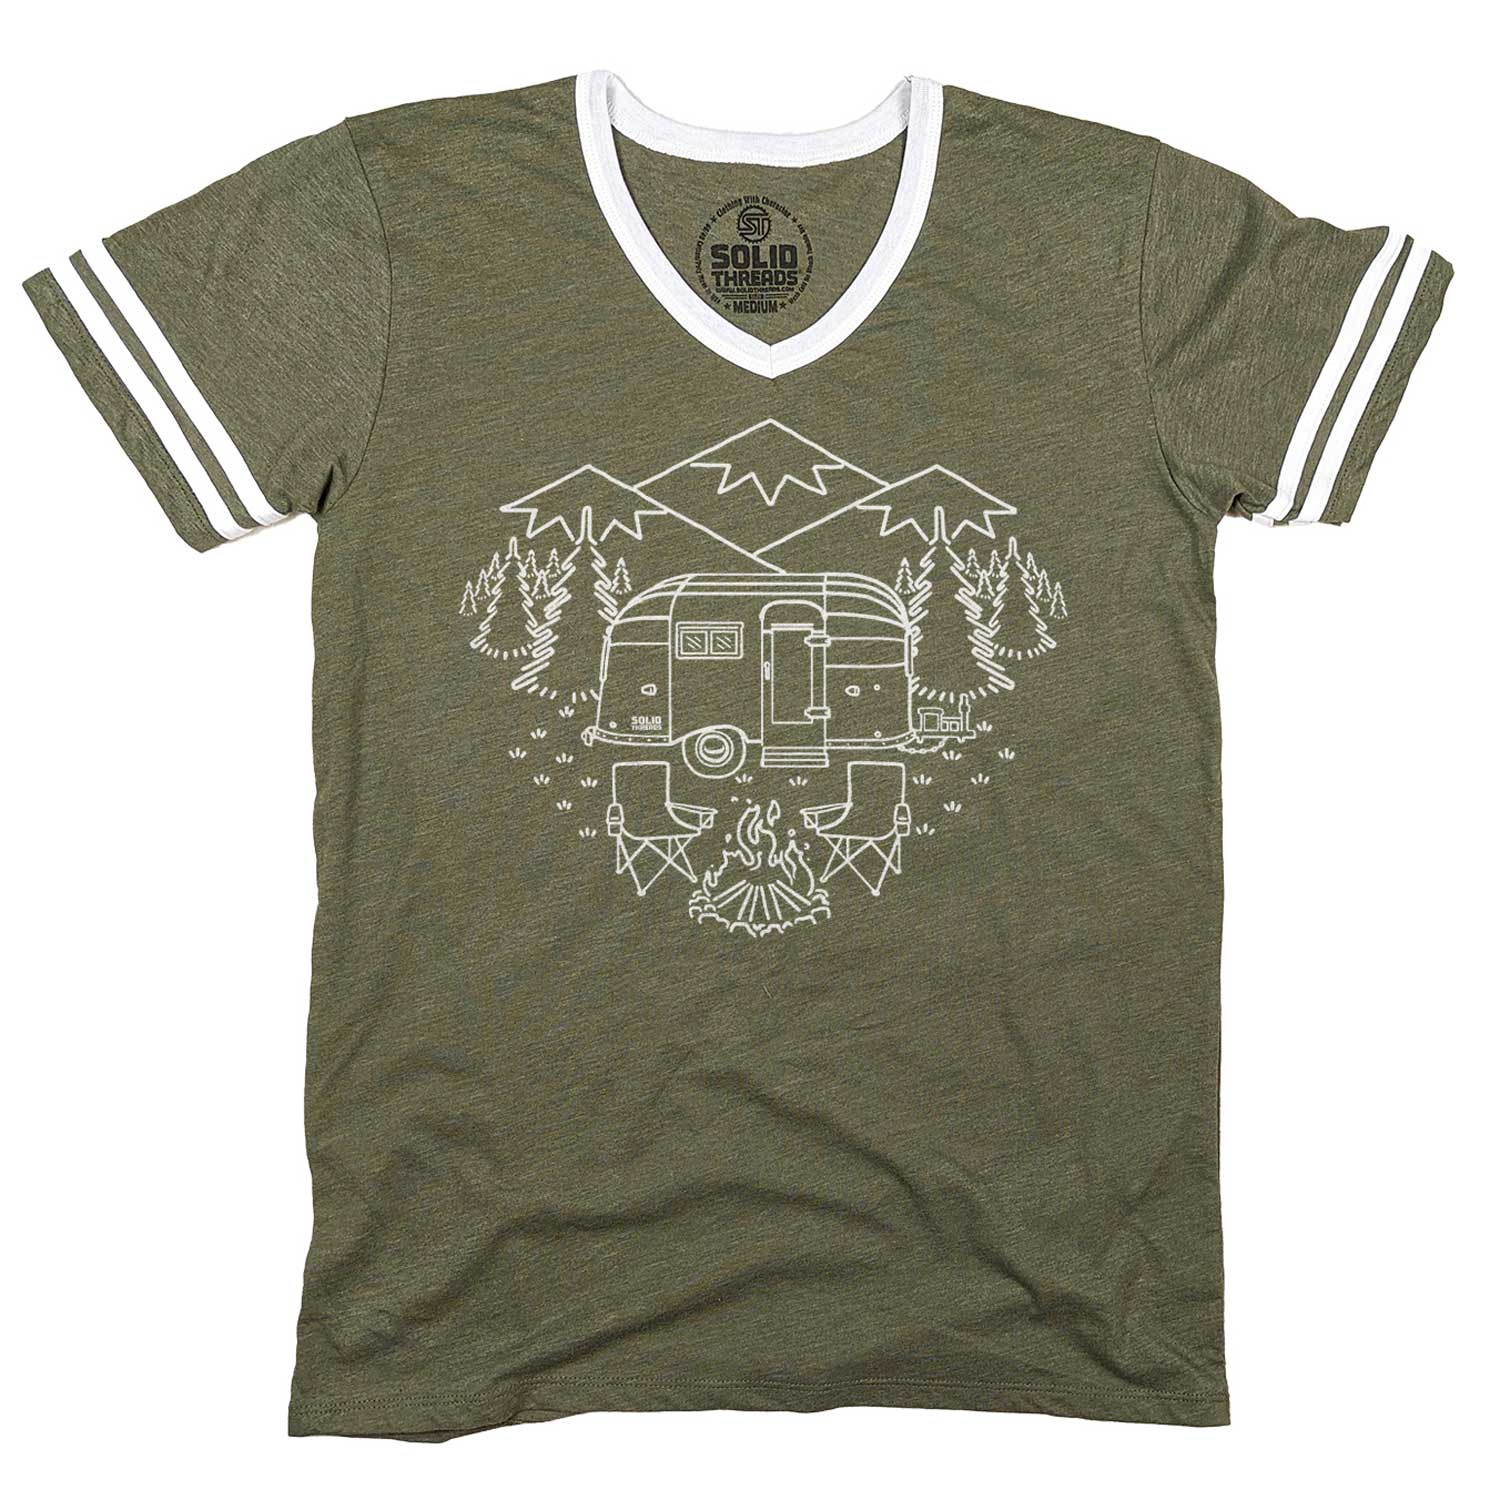 Men's Camp Site Vintage Graphic V-Neck Tee | Cool Airstream T-shirt | Solid Threads